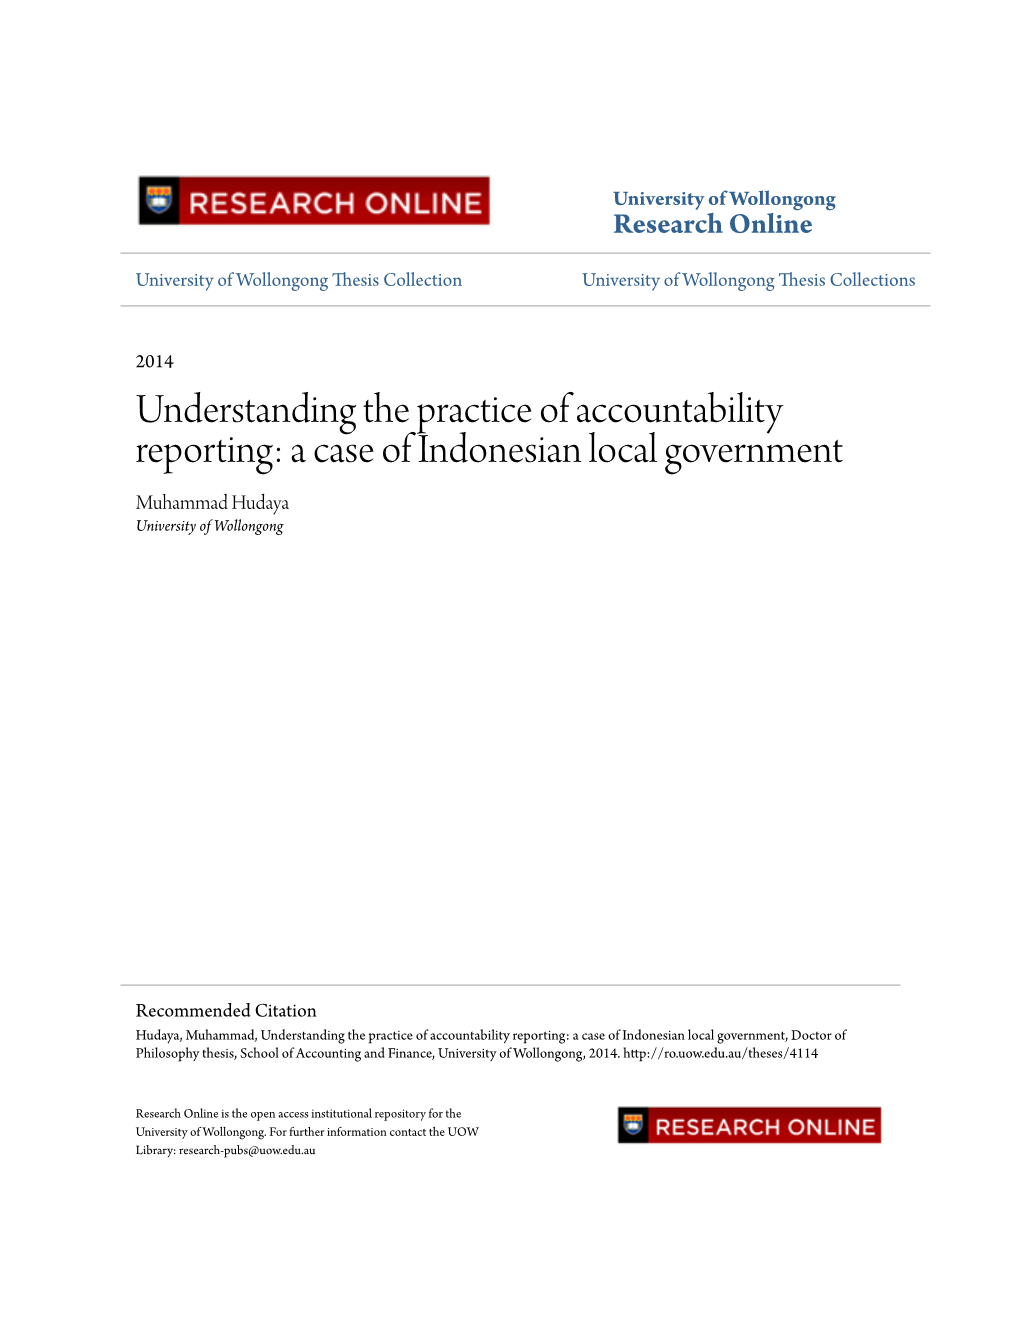 Understanding the Practice of Accountability Reporting: a Case of Indonesian Local Government Muhammad Hudaya University of Wollongong